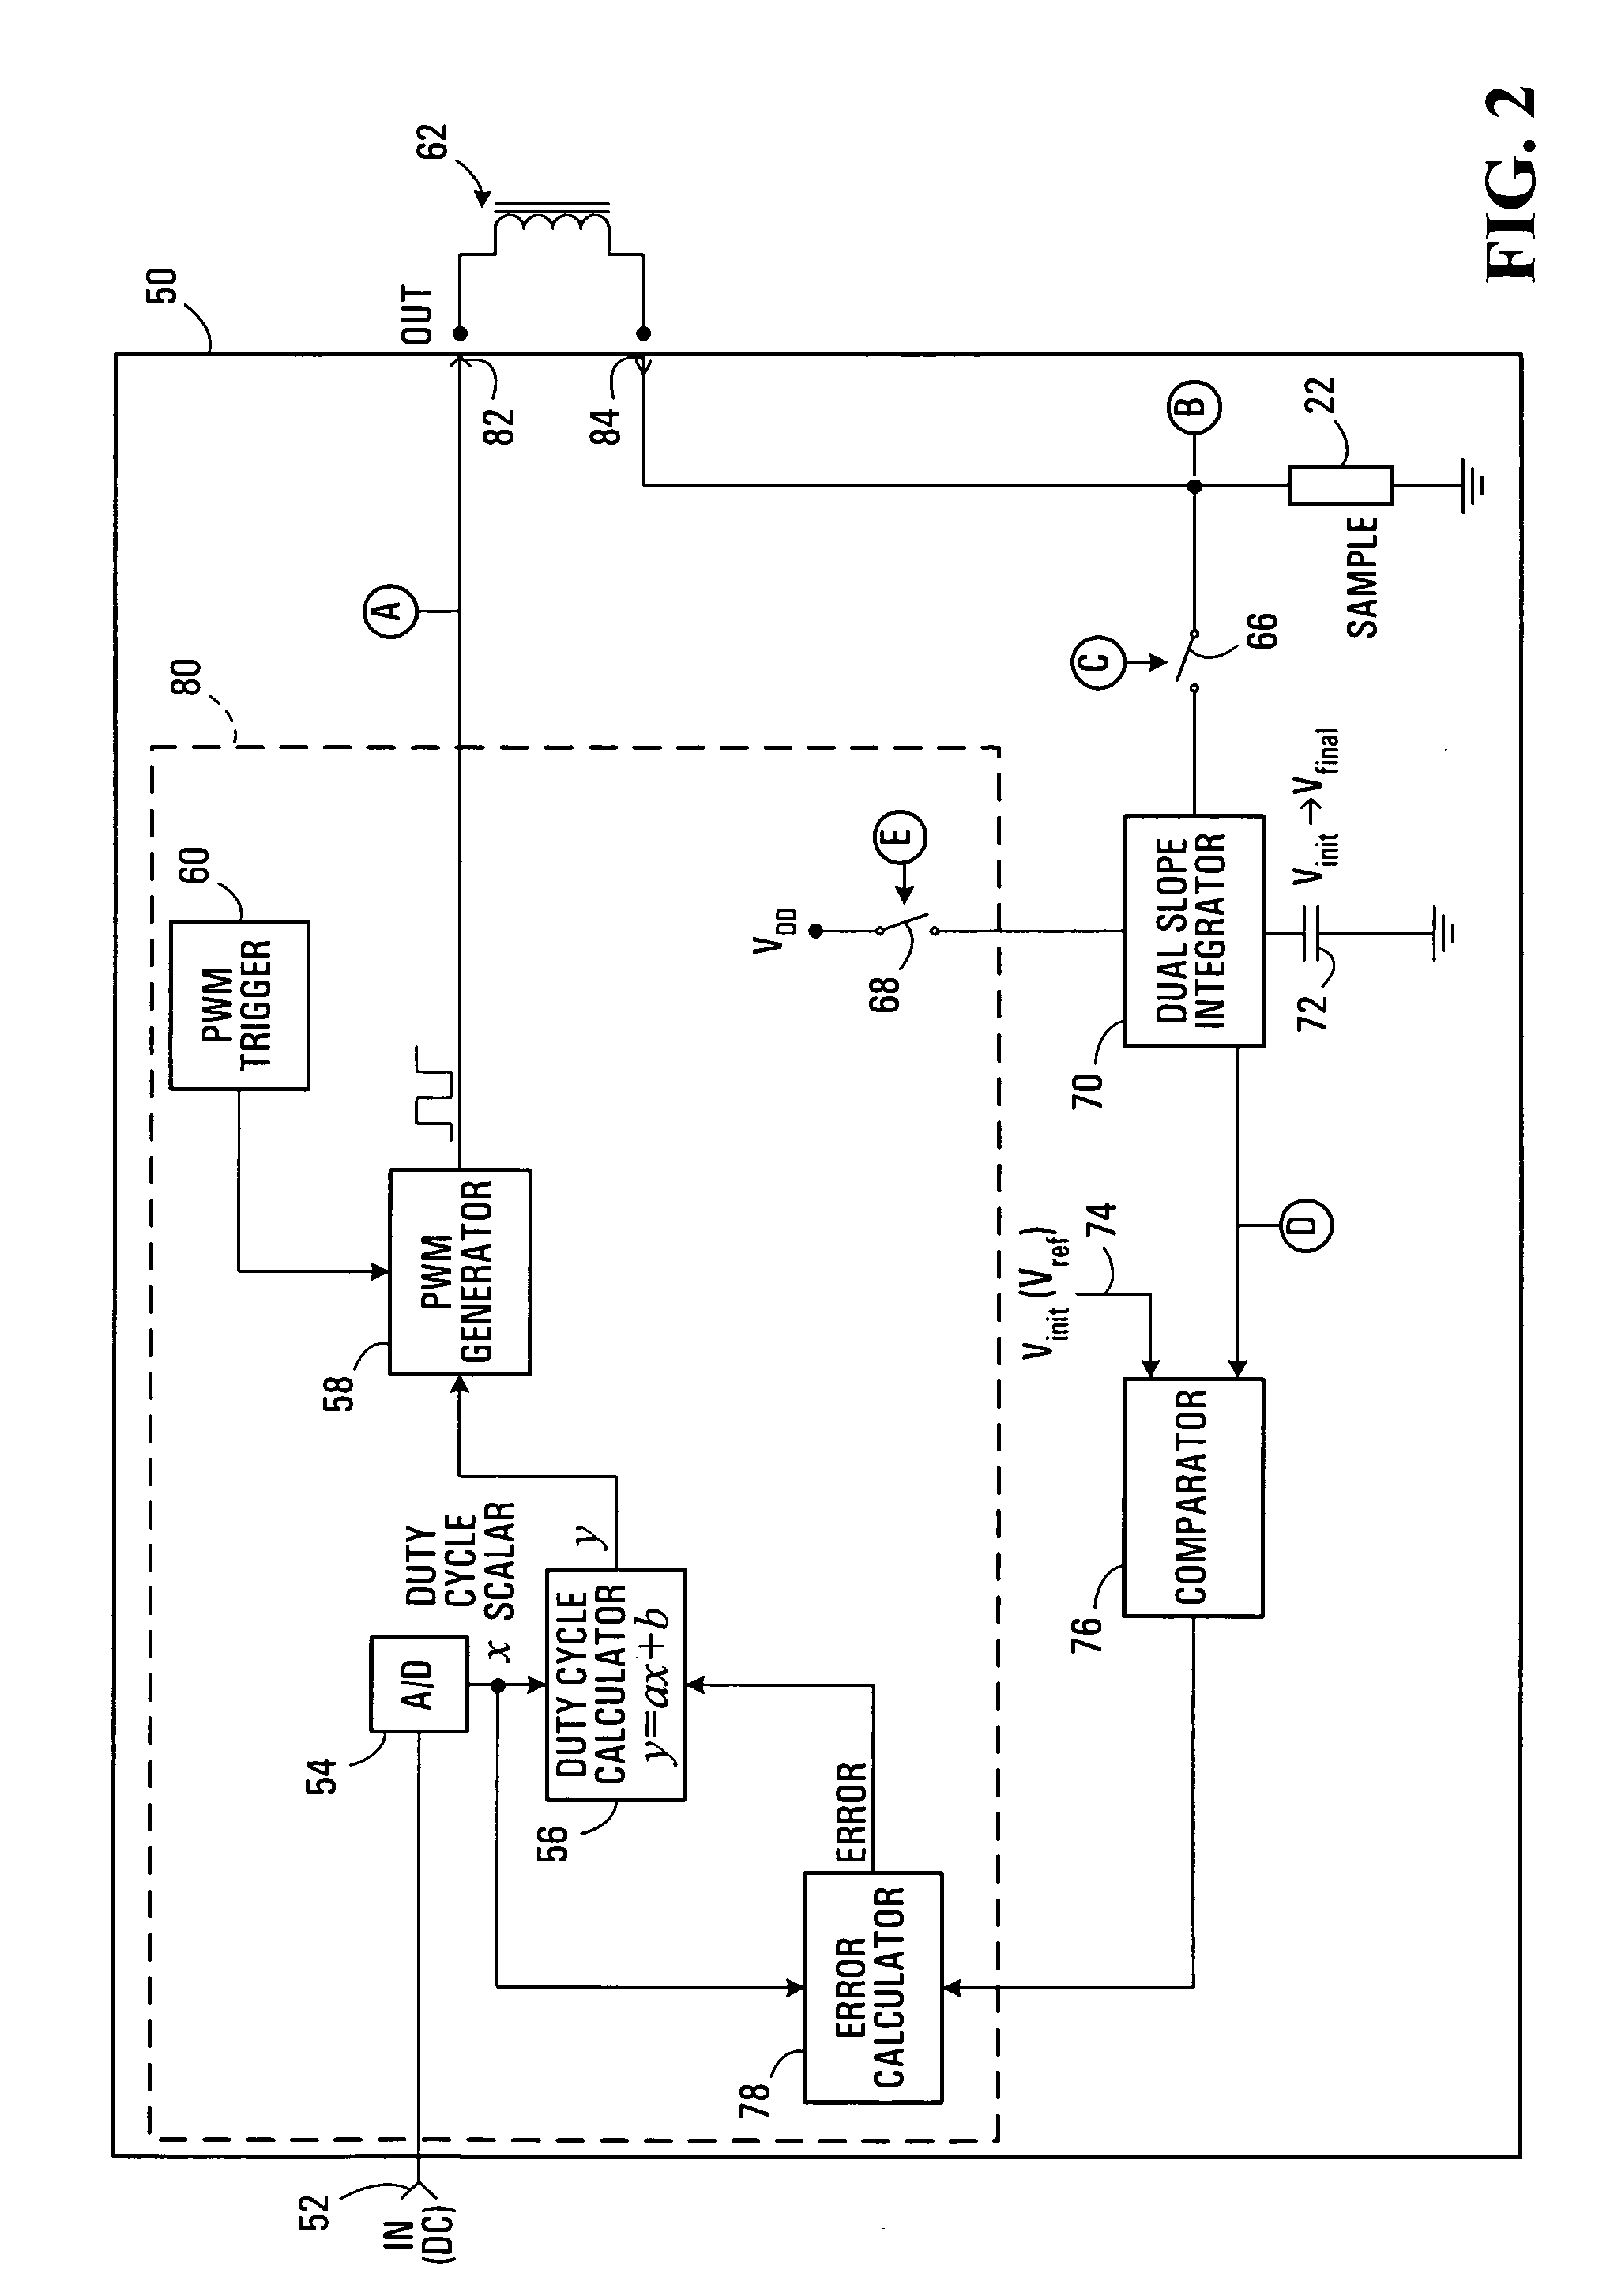 Current driver employing pulse-width modulation